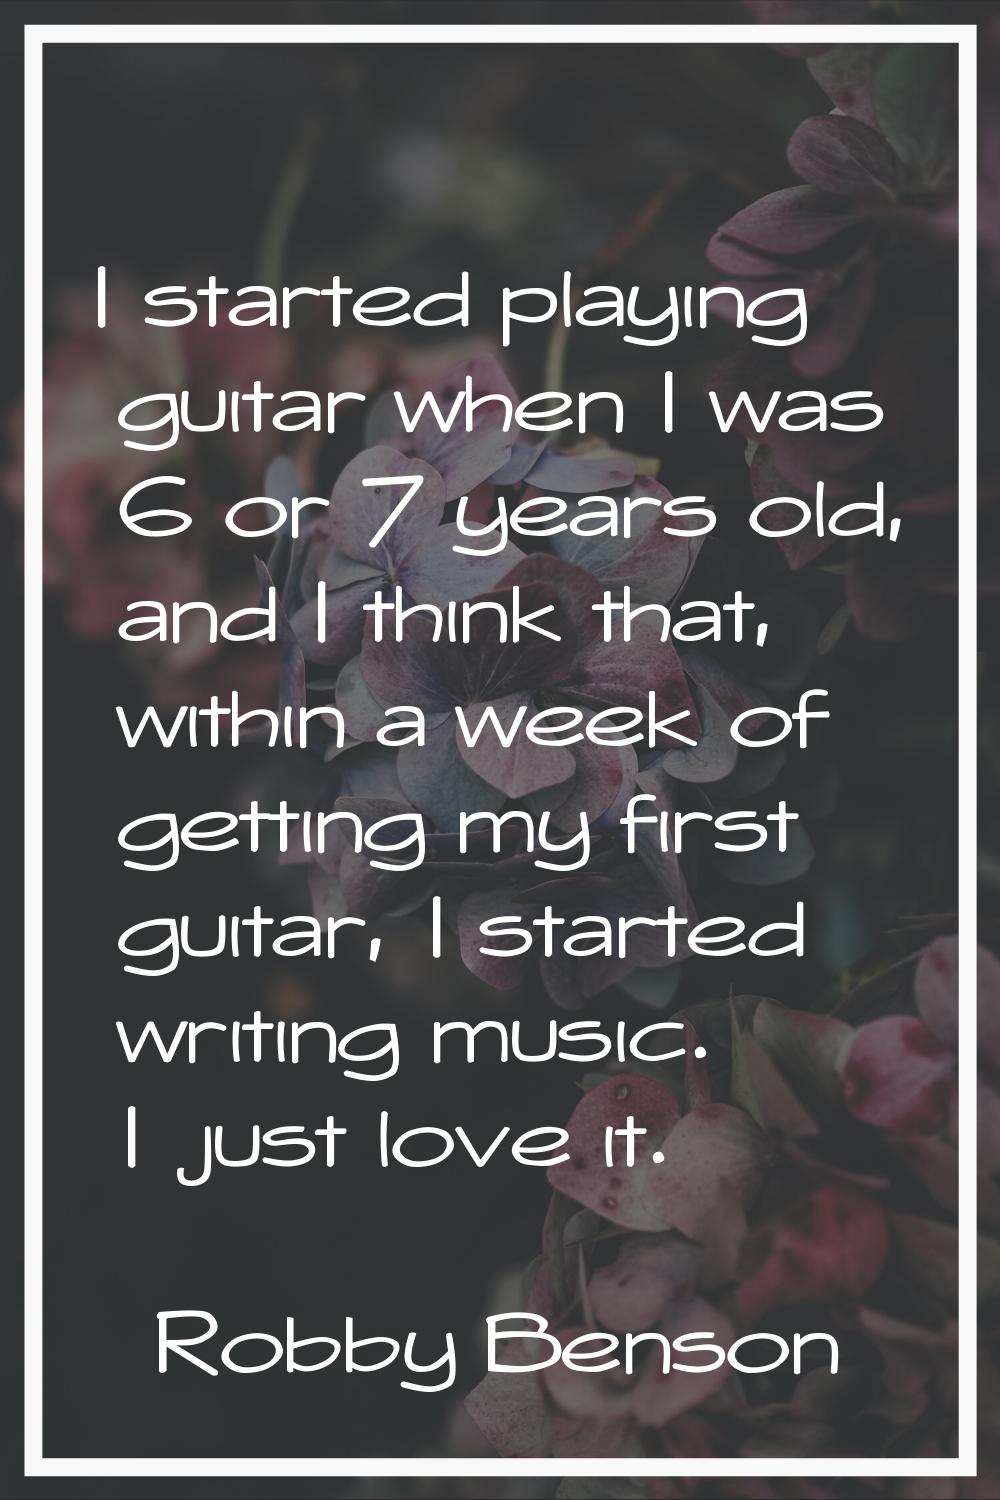 I started playing guitar when I was 6 or 7 years old, and I think that, within a week of getting my